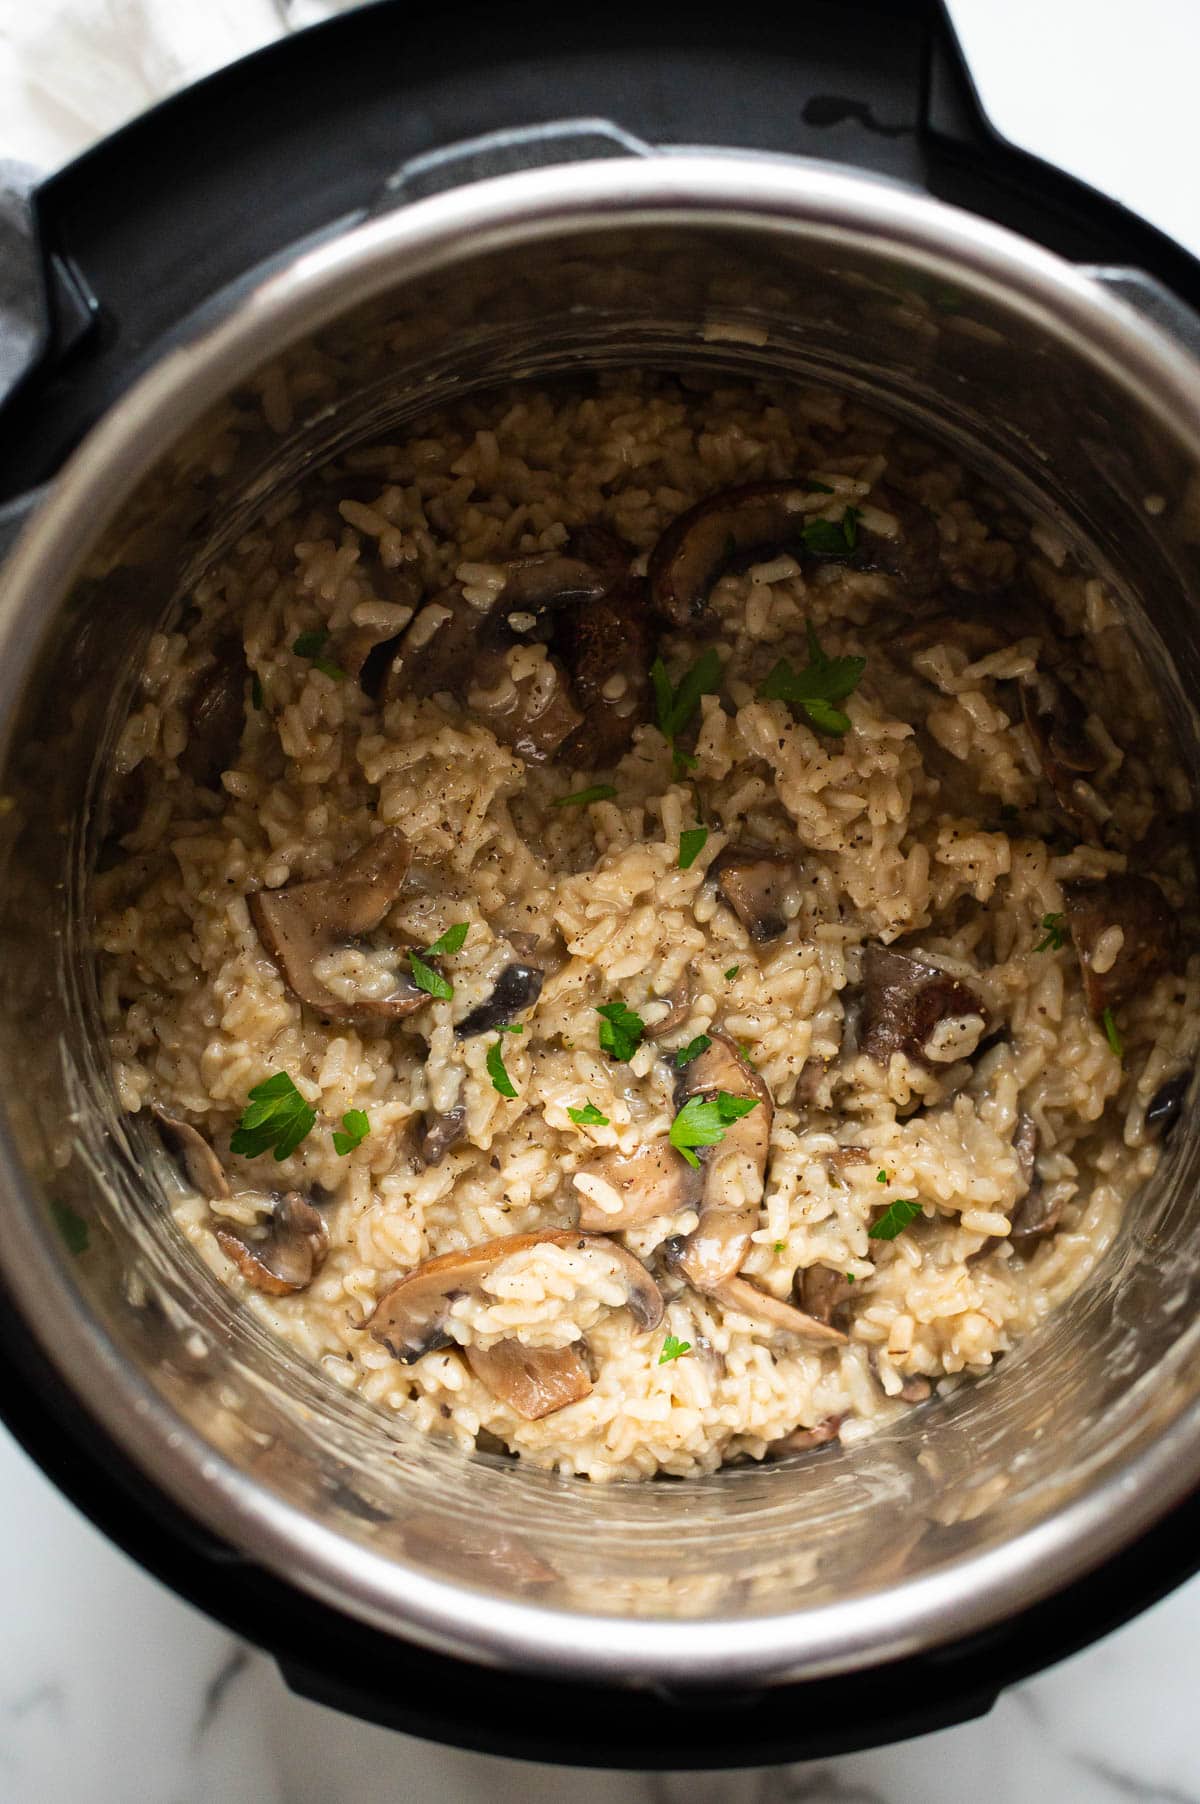 Instant Pot mushroom risotto garnished with parsley in a pressure cooker.